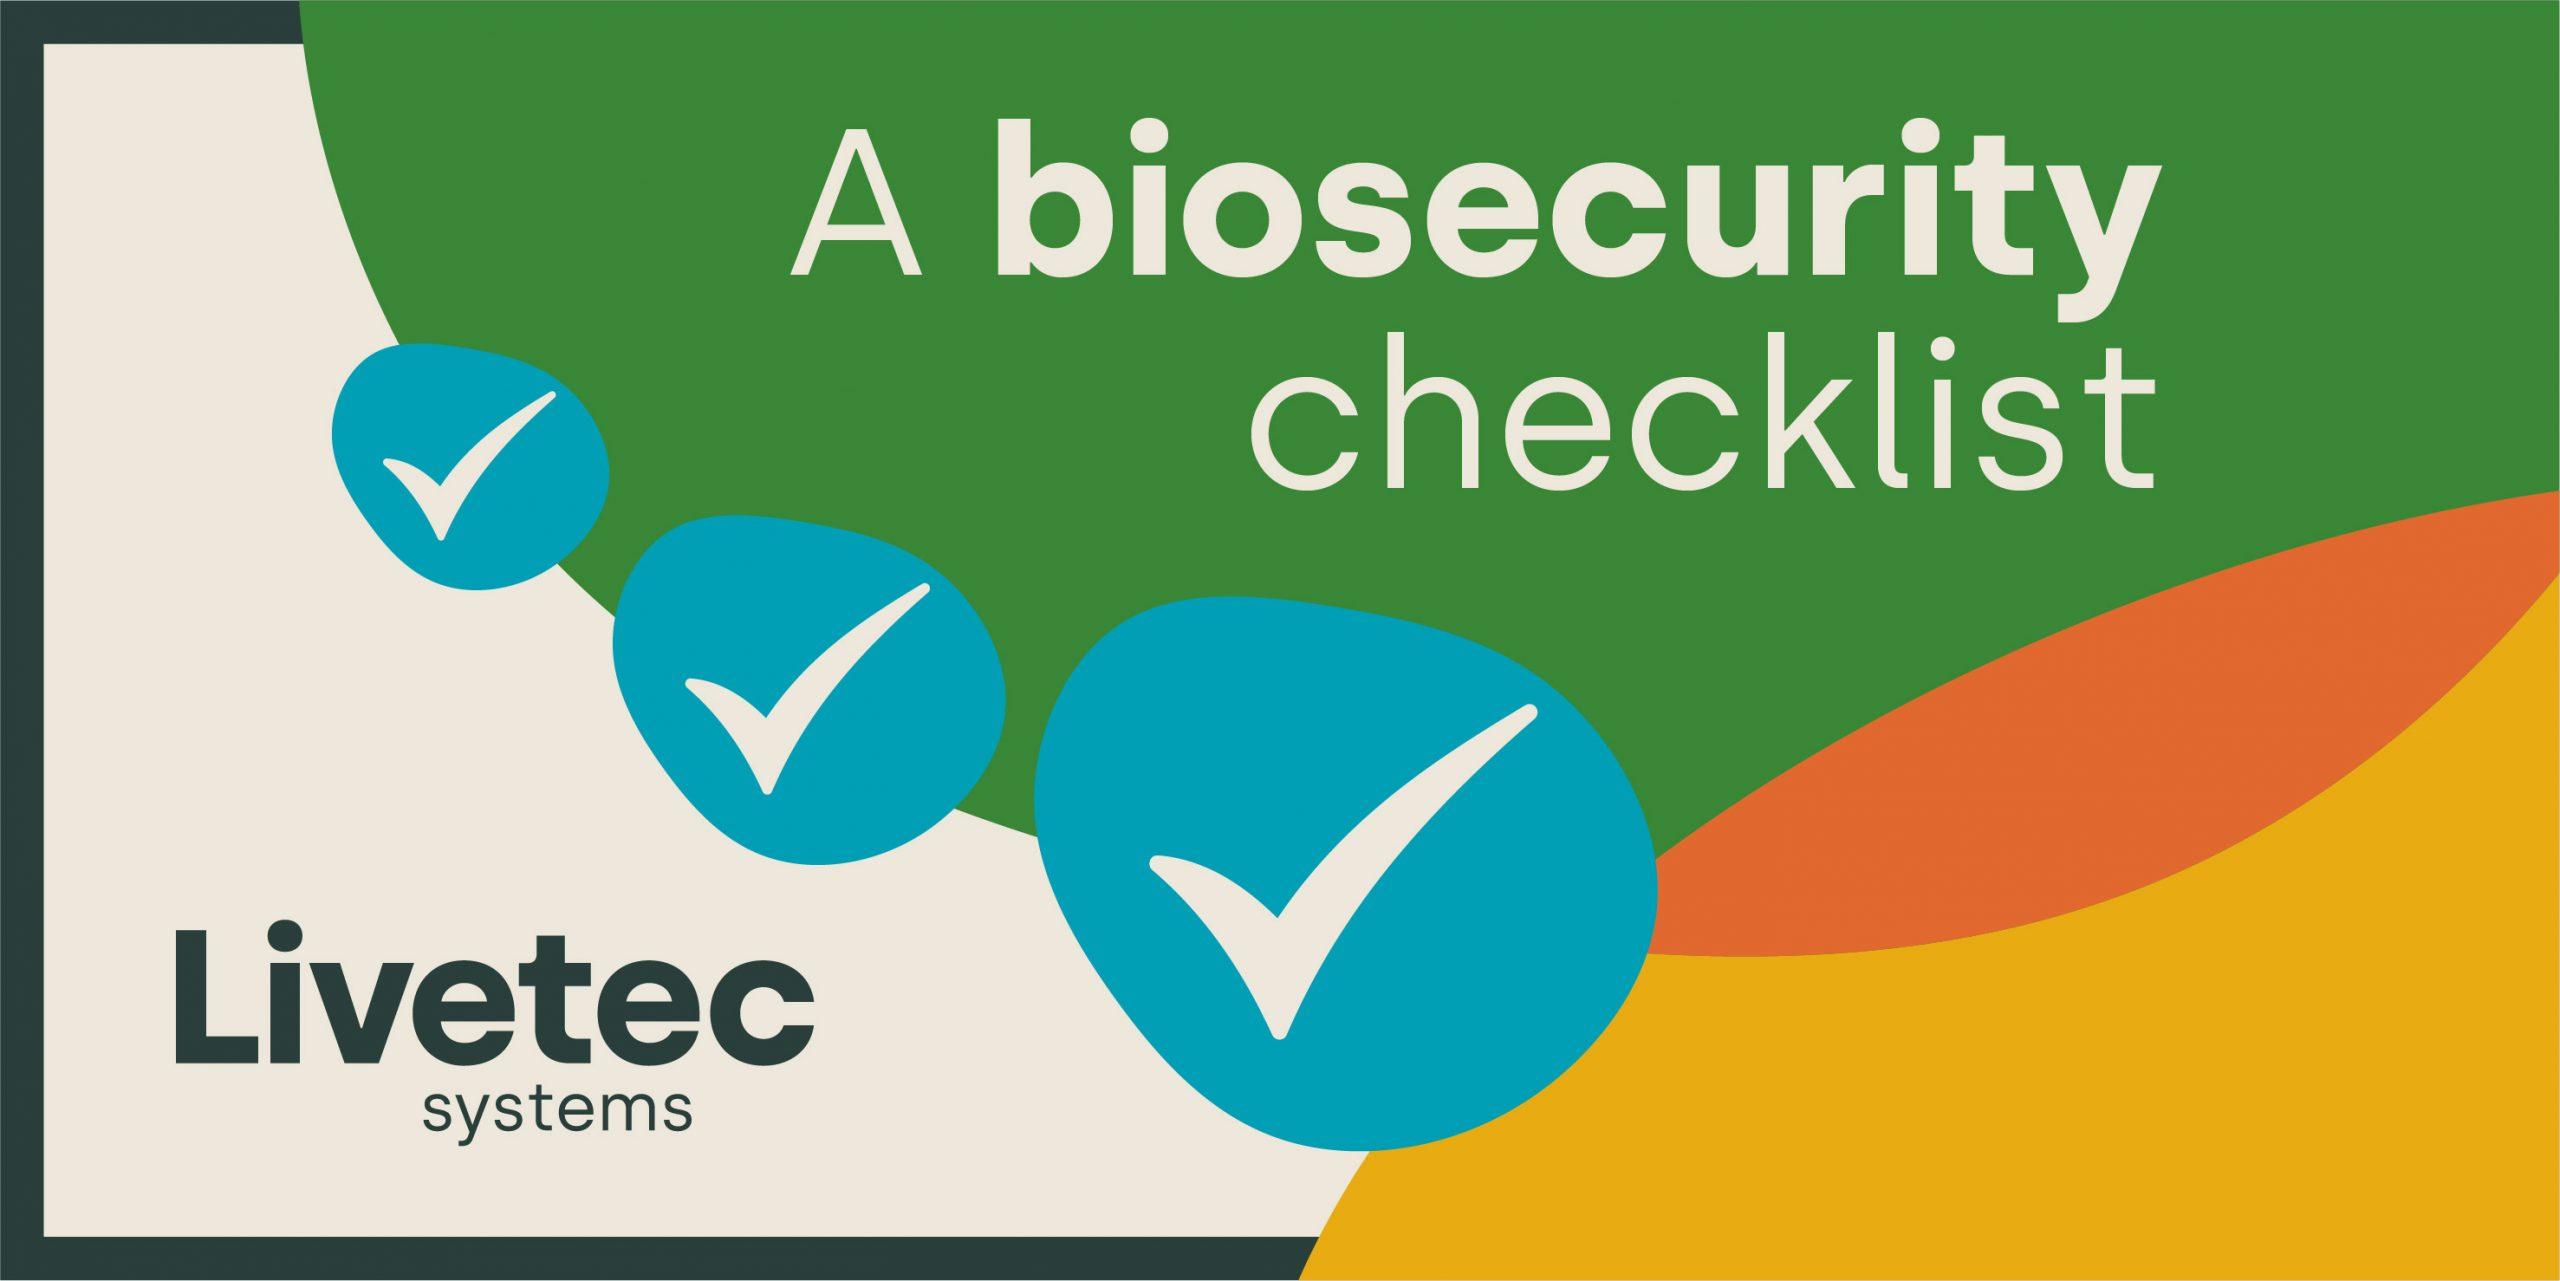 poultry farm biosecurity checklist, plan and farm biosecurity policy